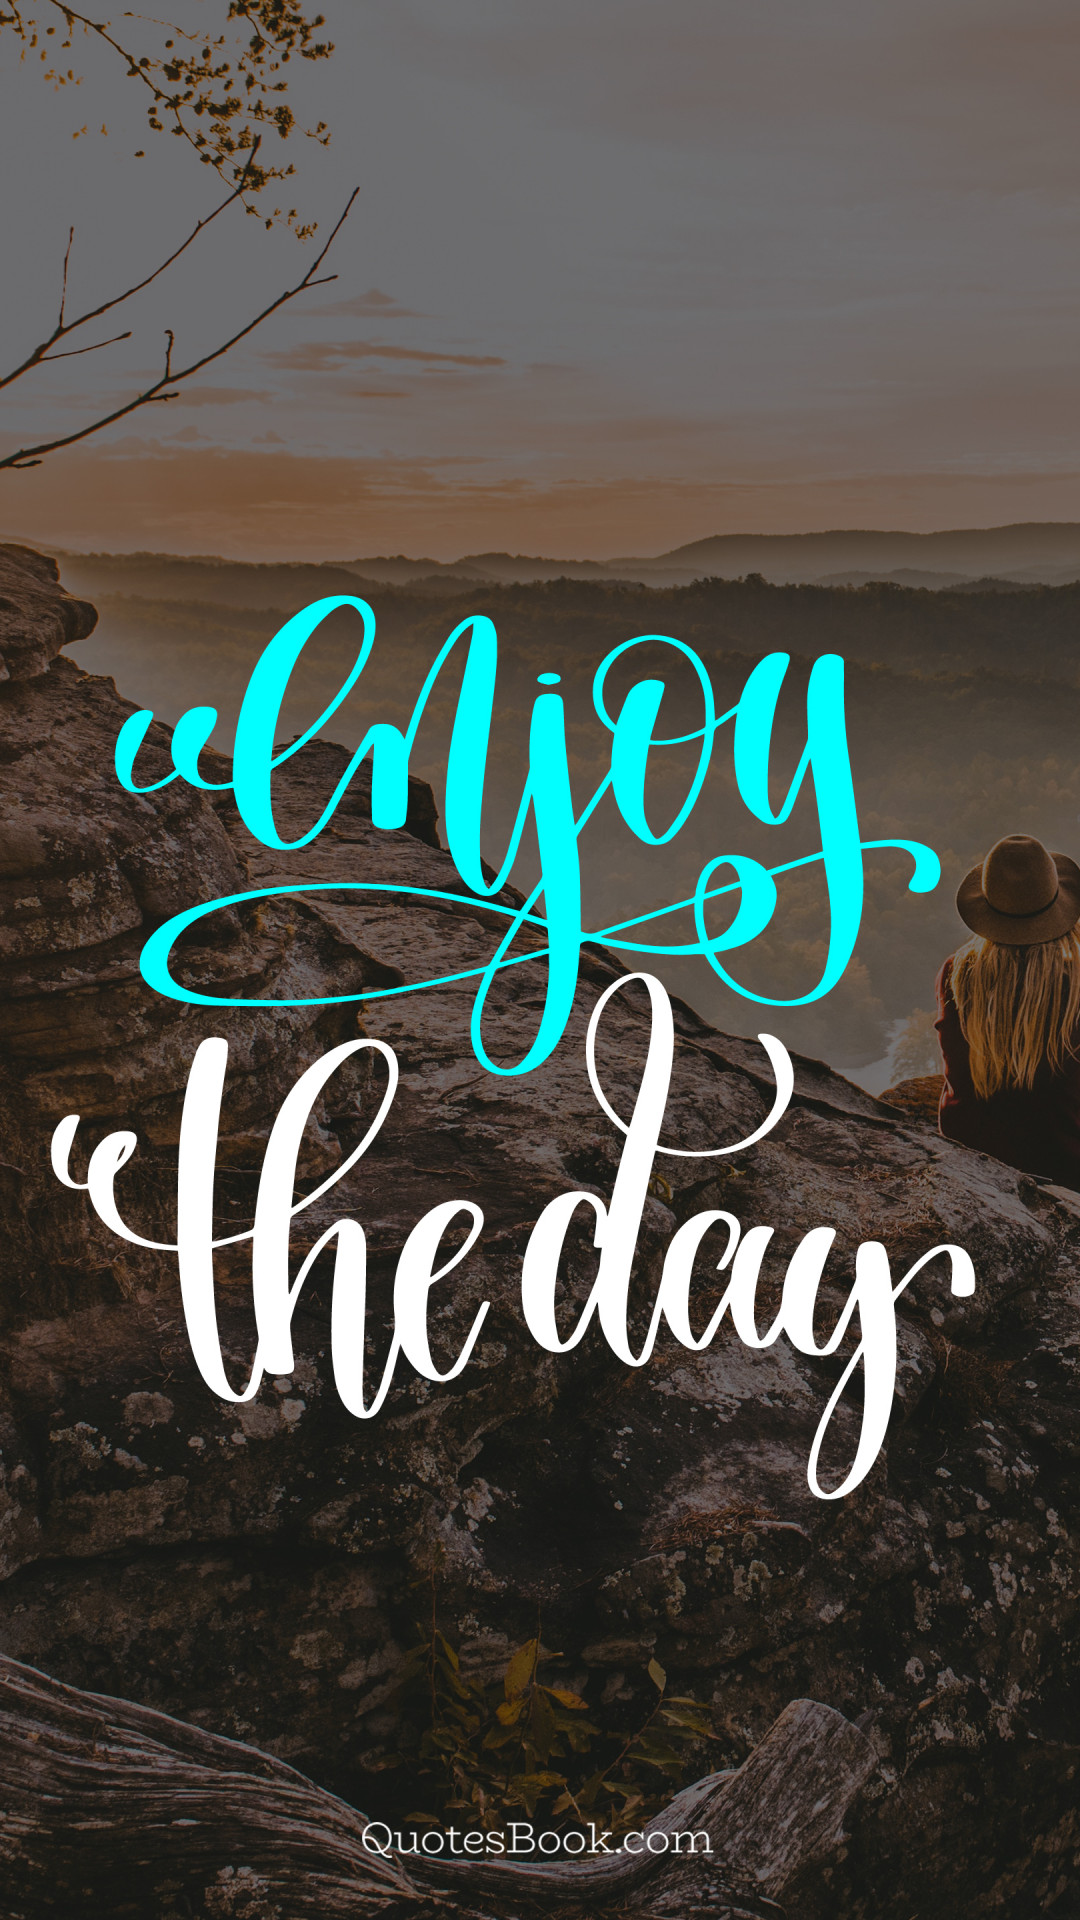 Enjoy the day - QuotesBook